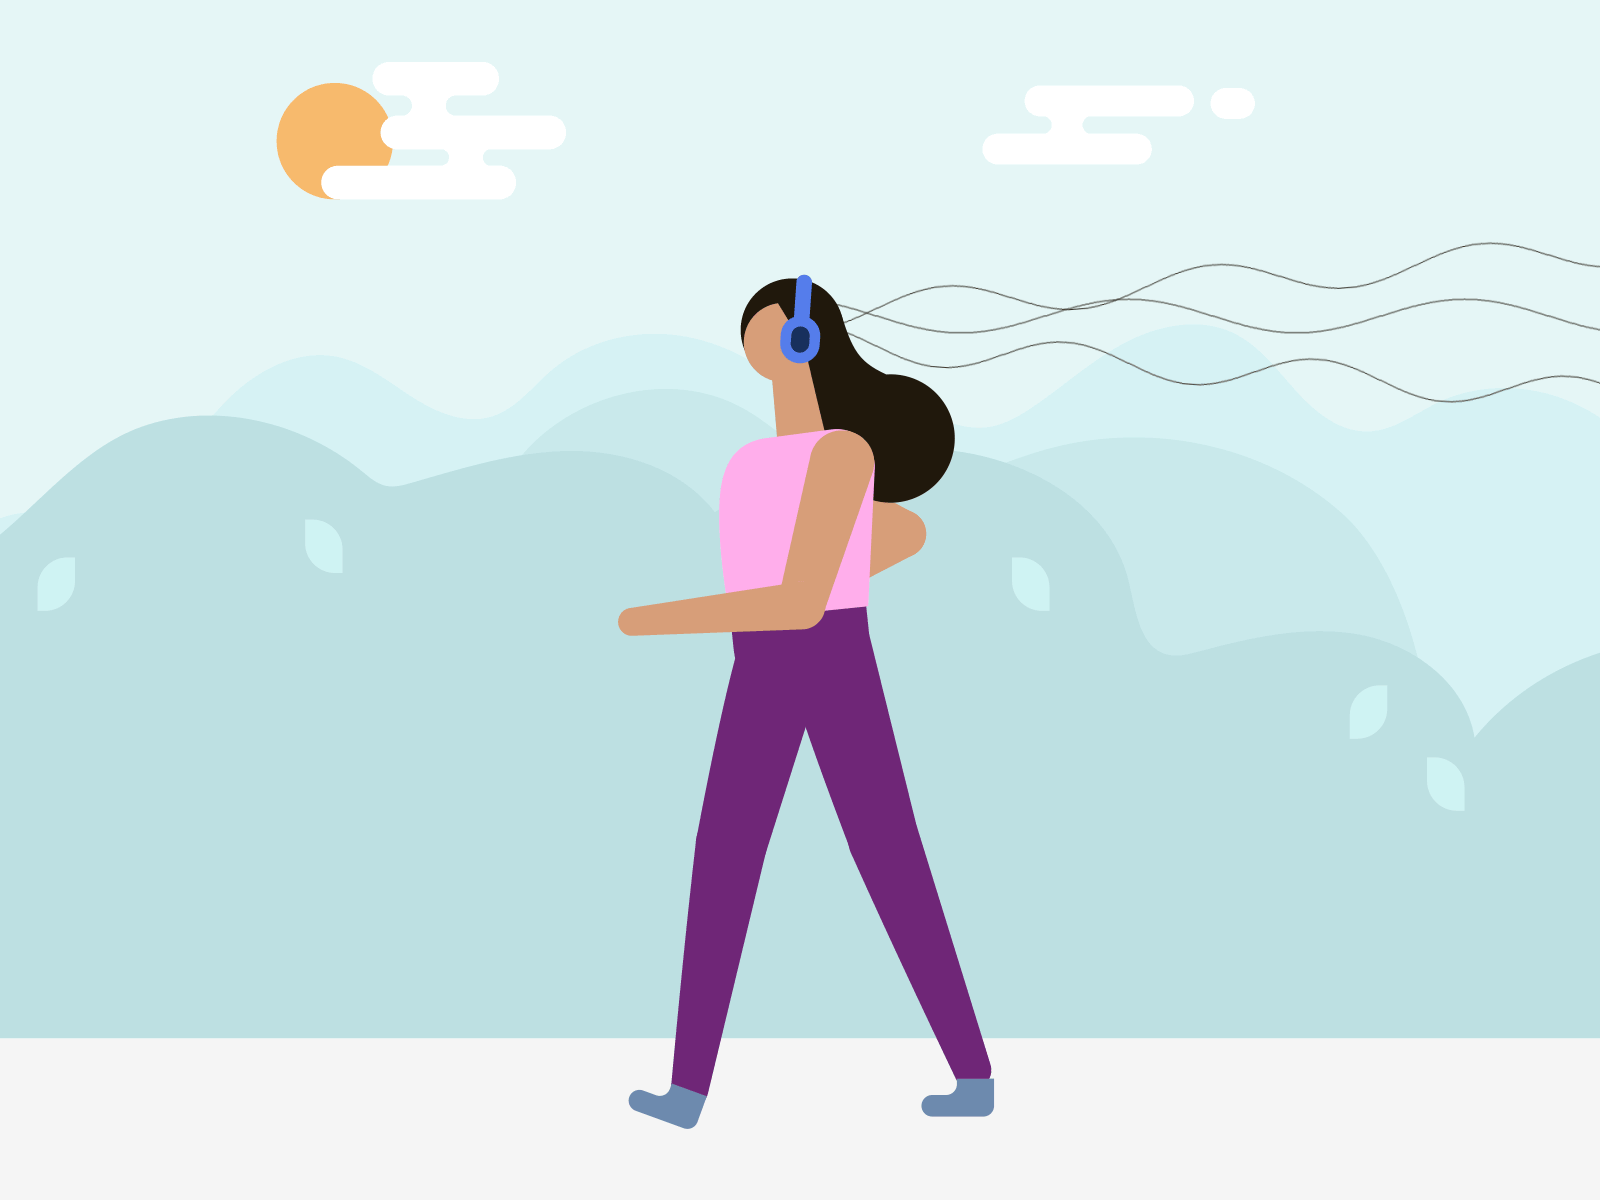 Cardio walking after effects animation cardio flat design gif illustration music park vector walking woman